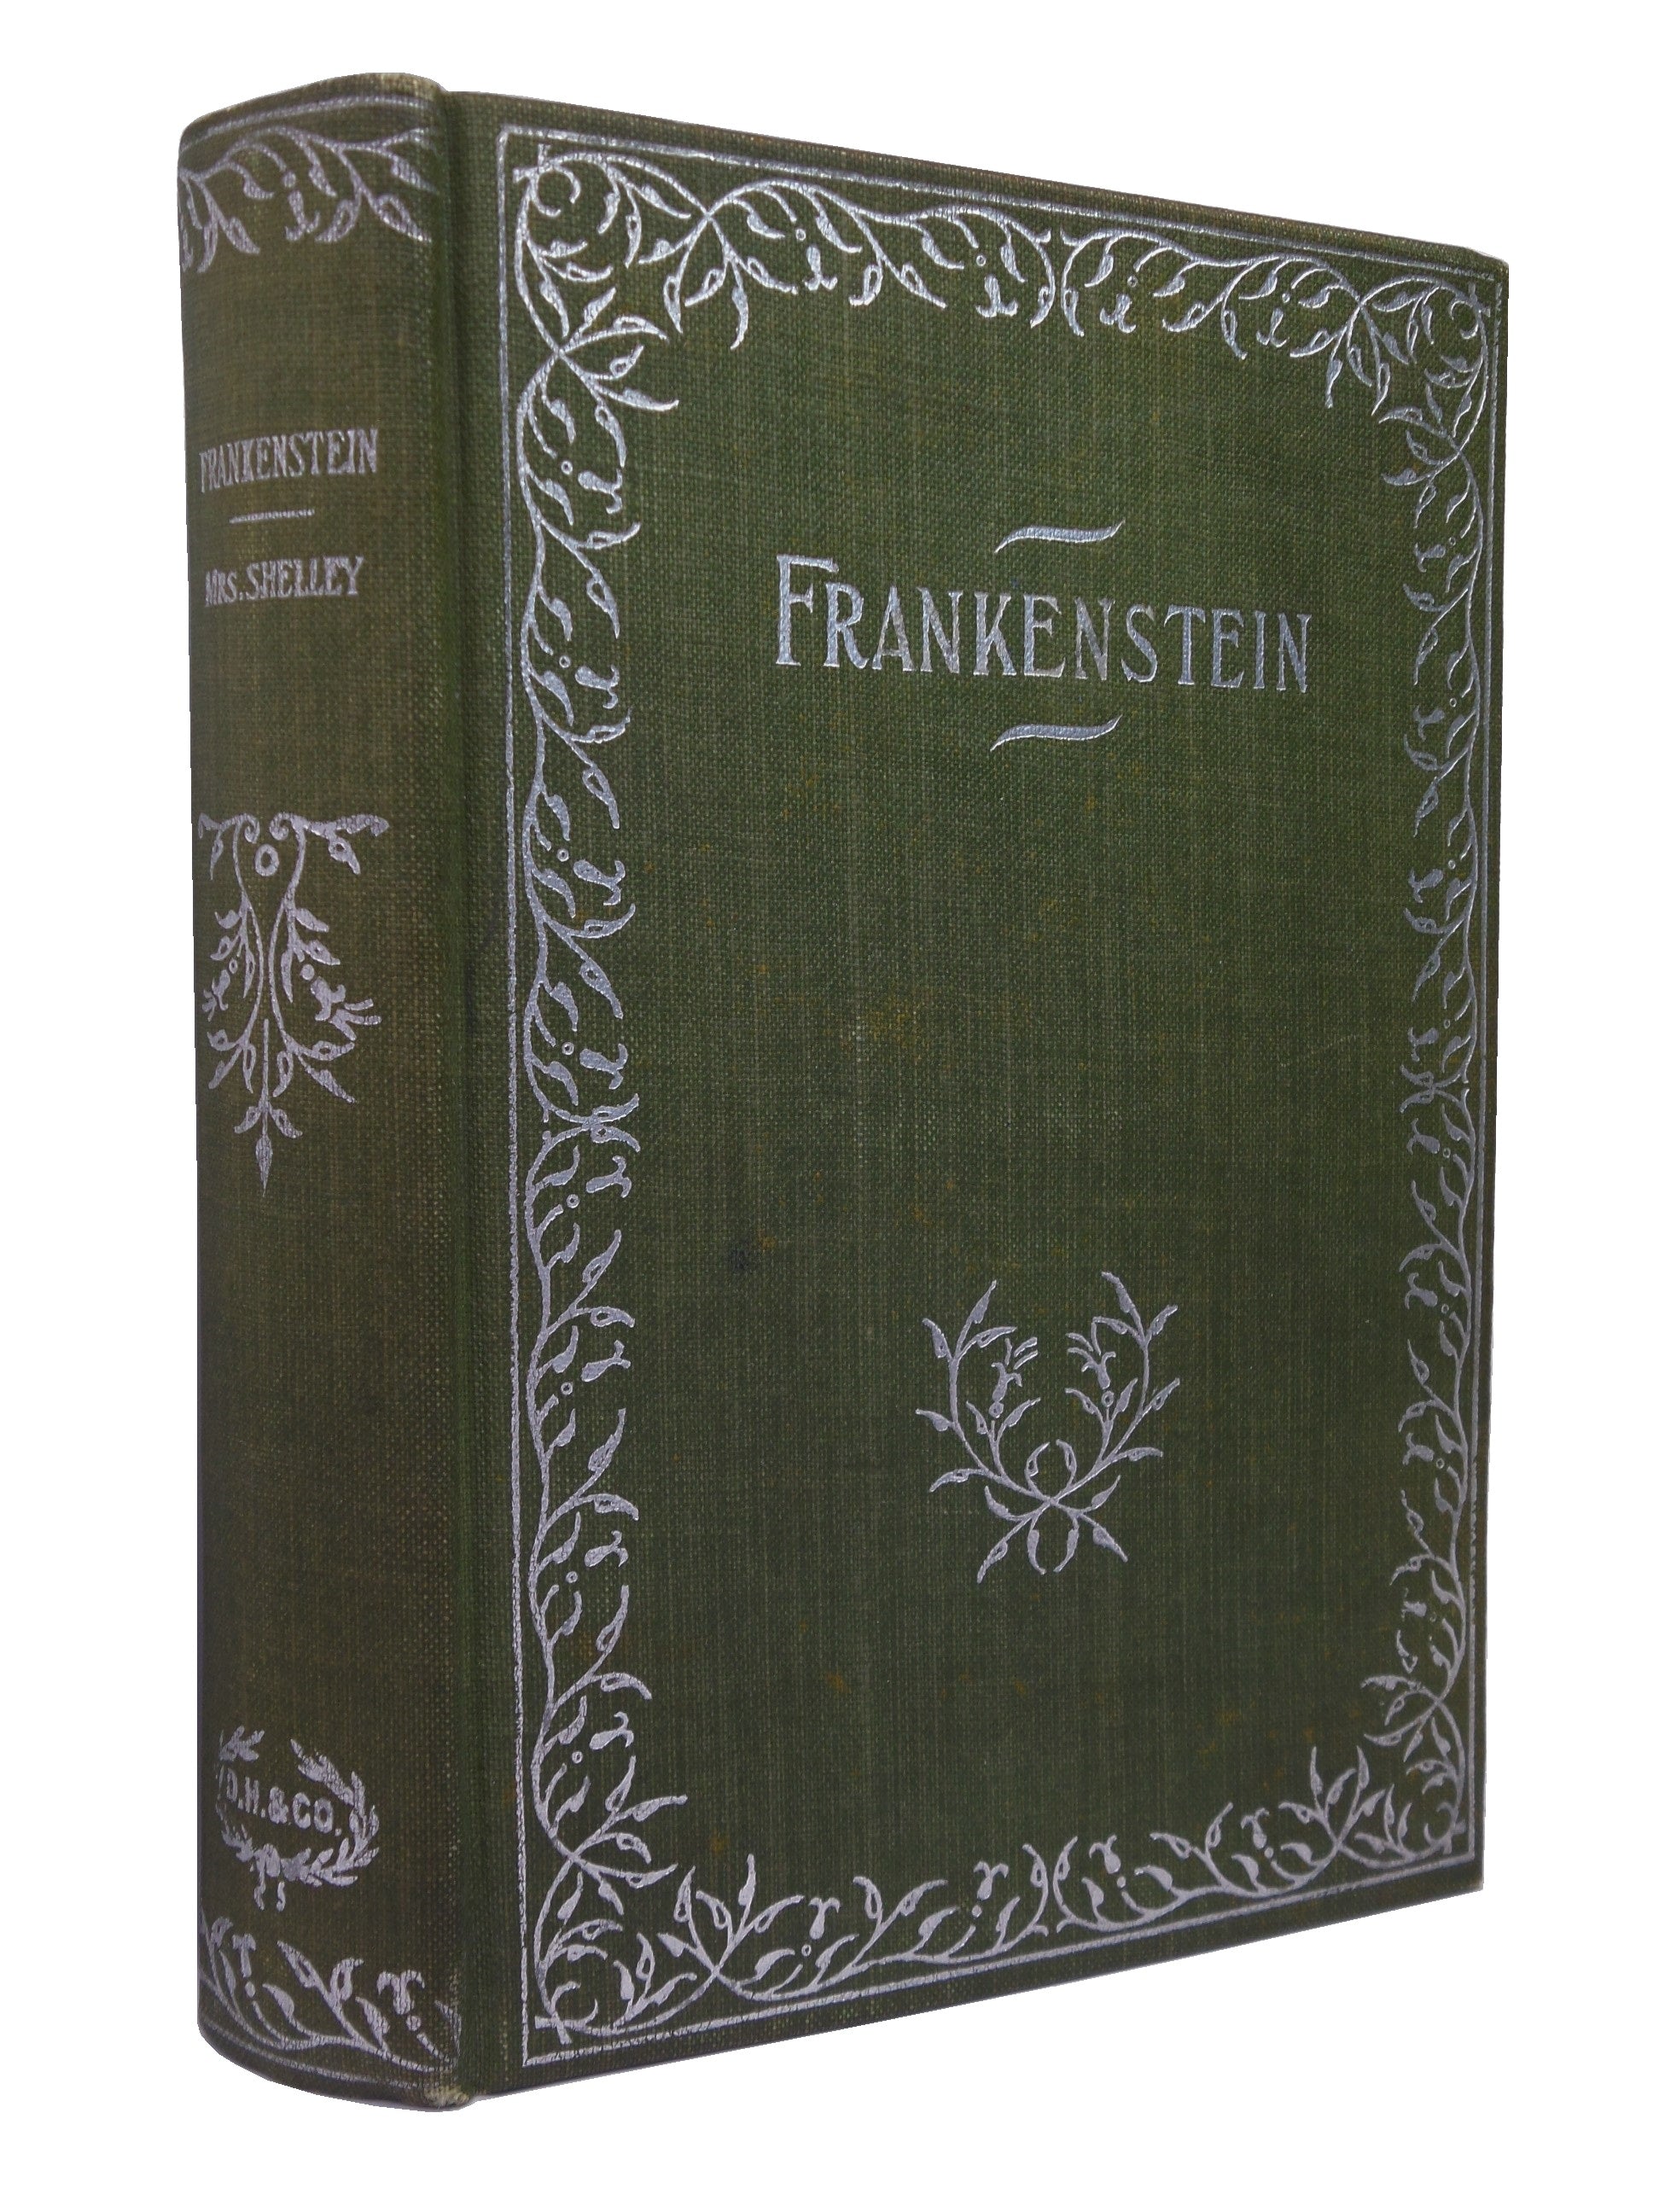 FRANKENSTEIN; OR, THE MODERN PROMETHEUS BY MARY SHELLEY 1895